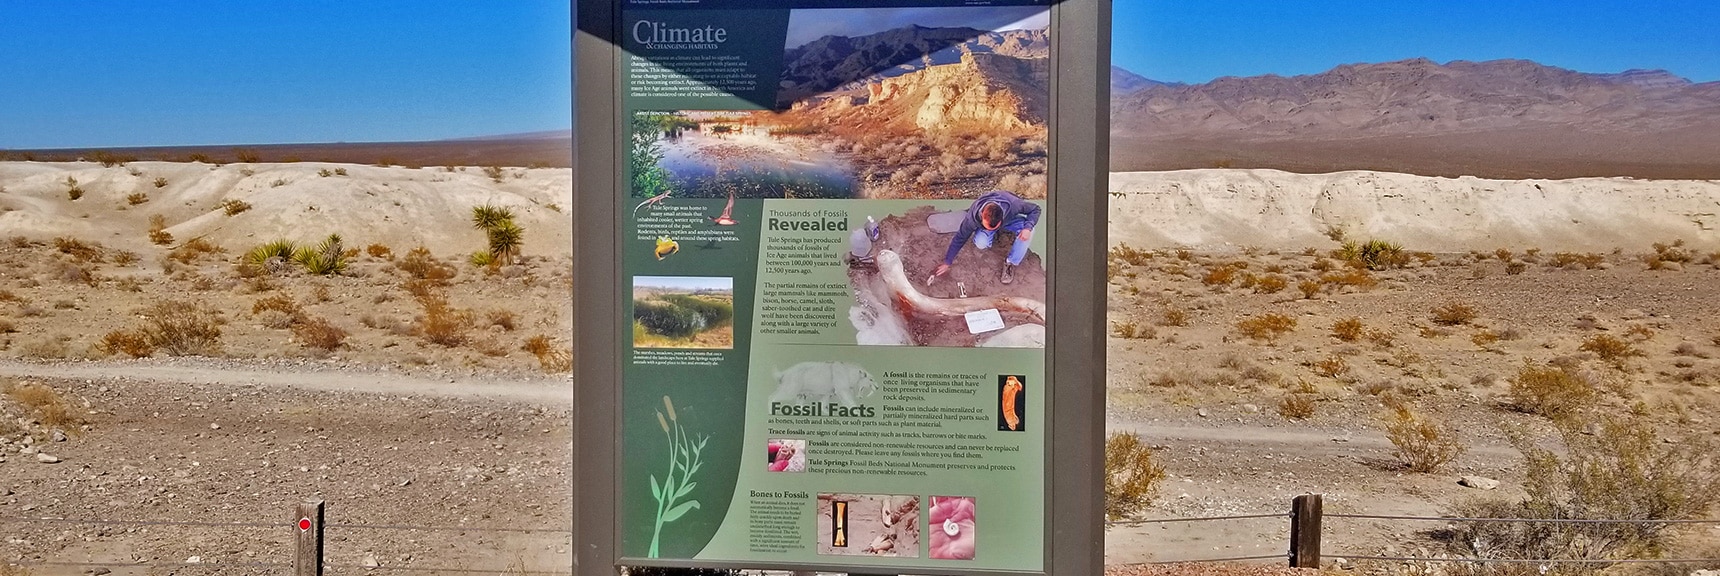 Tule Springs Fossil Beds National Monument at the North End of Durango | Centennial Hills Mountain Bike Conditioning Adventure Loop, Las Vegas, Nevada